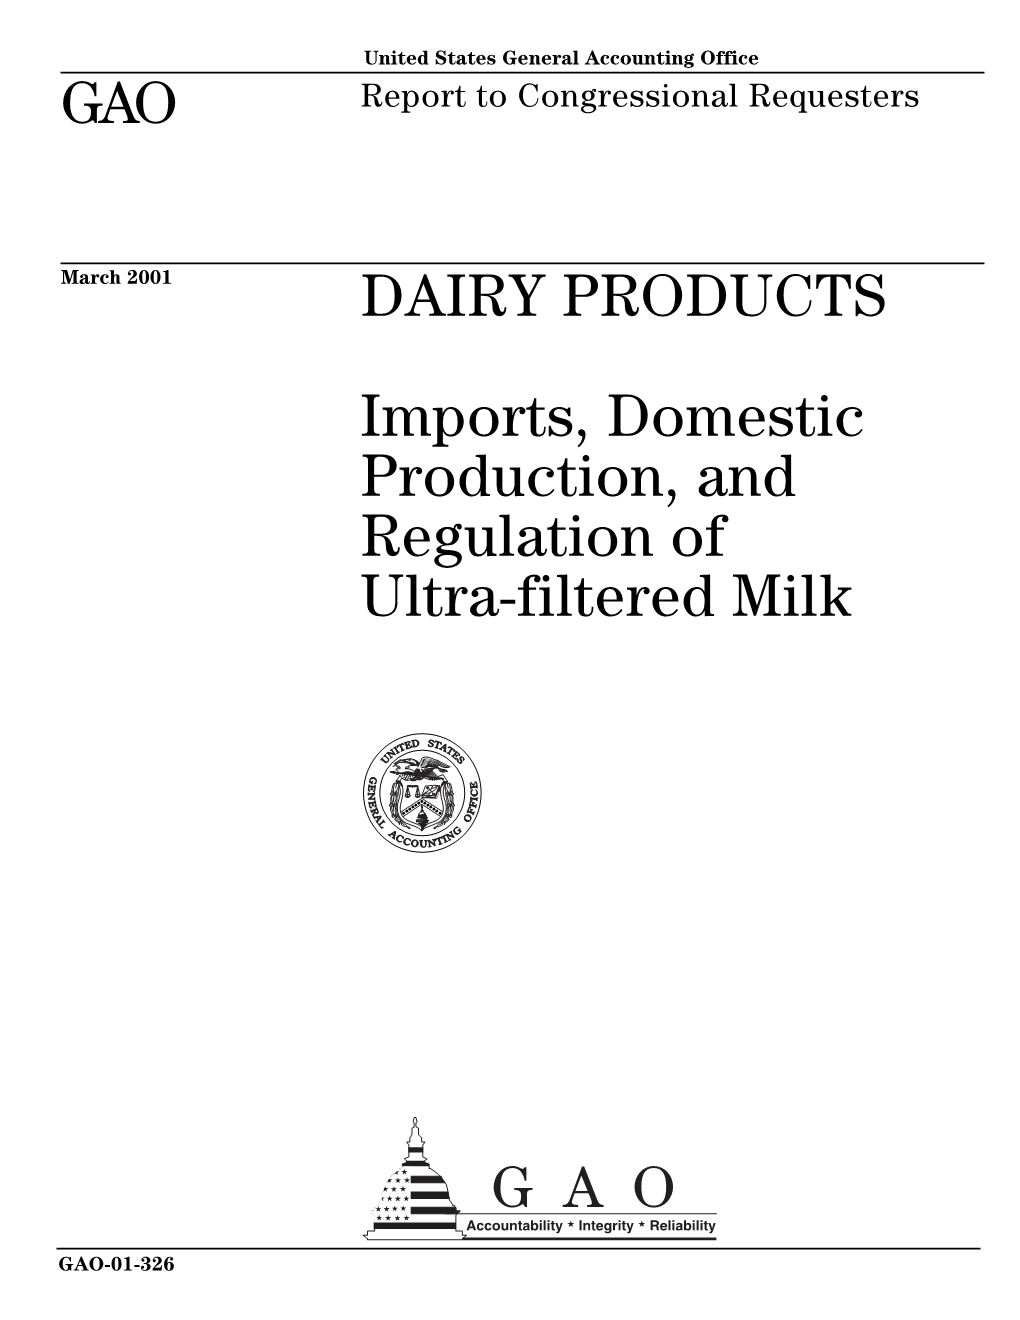 Imports, Domestic Production, and Regulation of Ultra-Filtered Milk